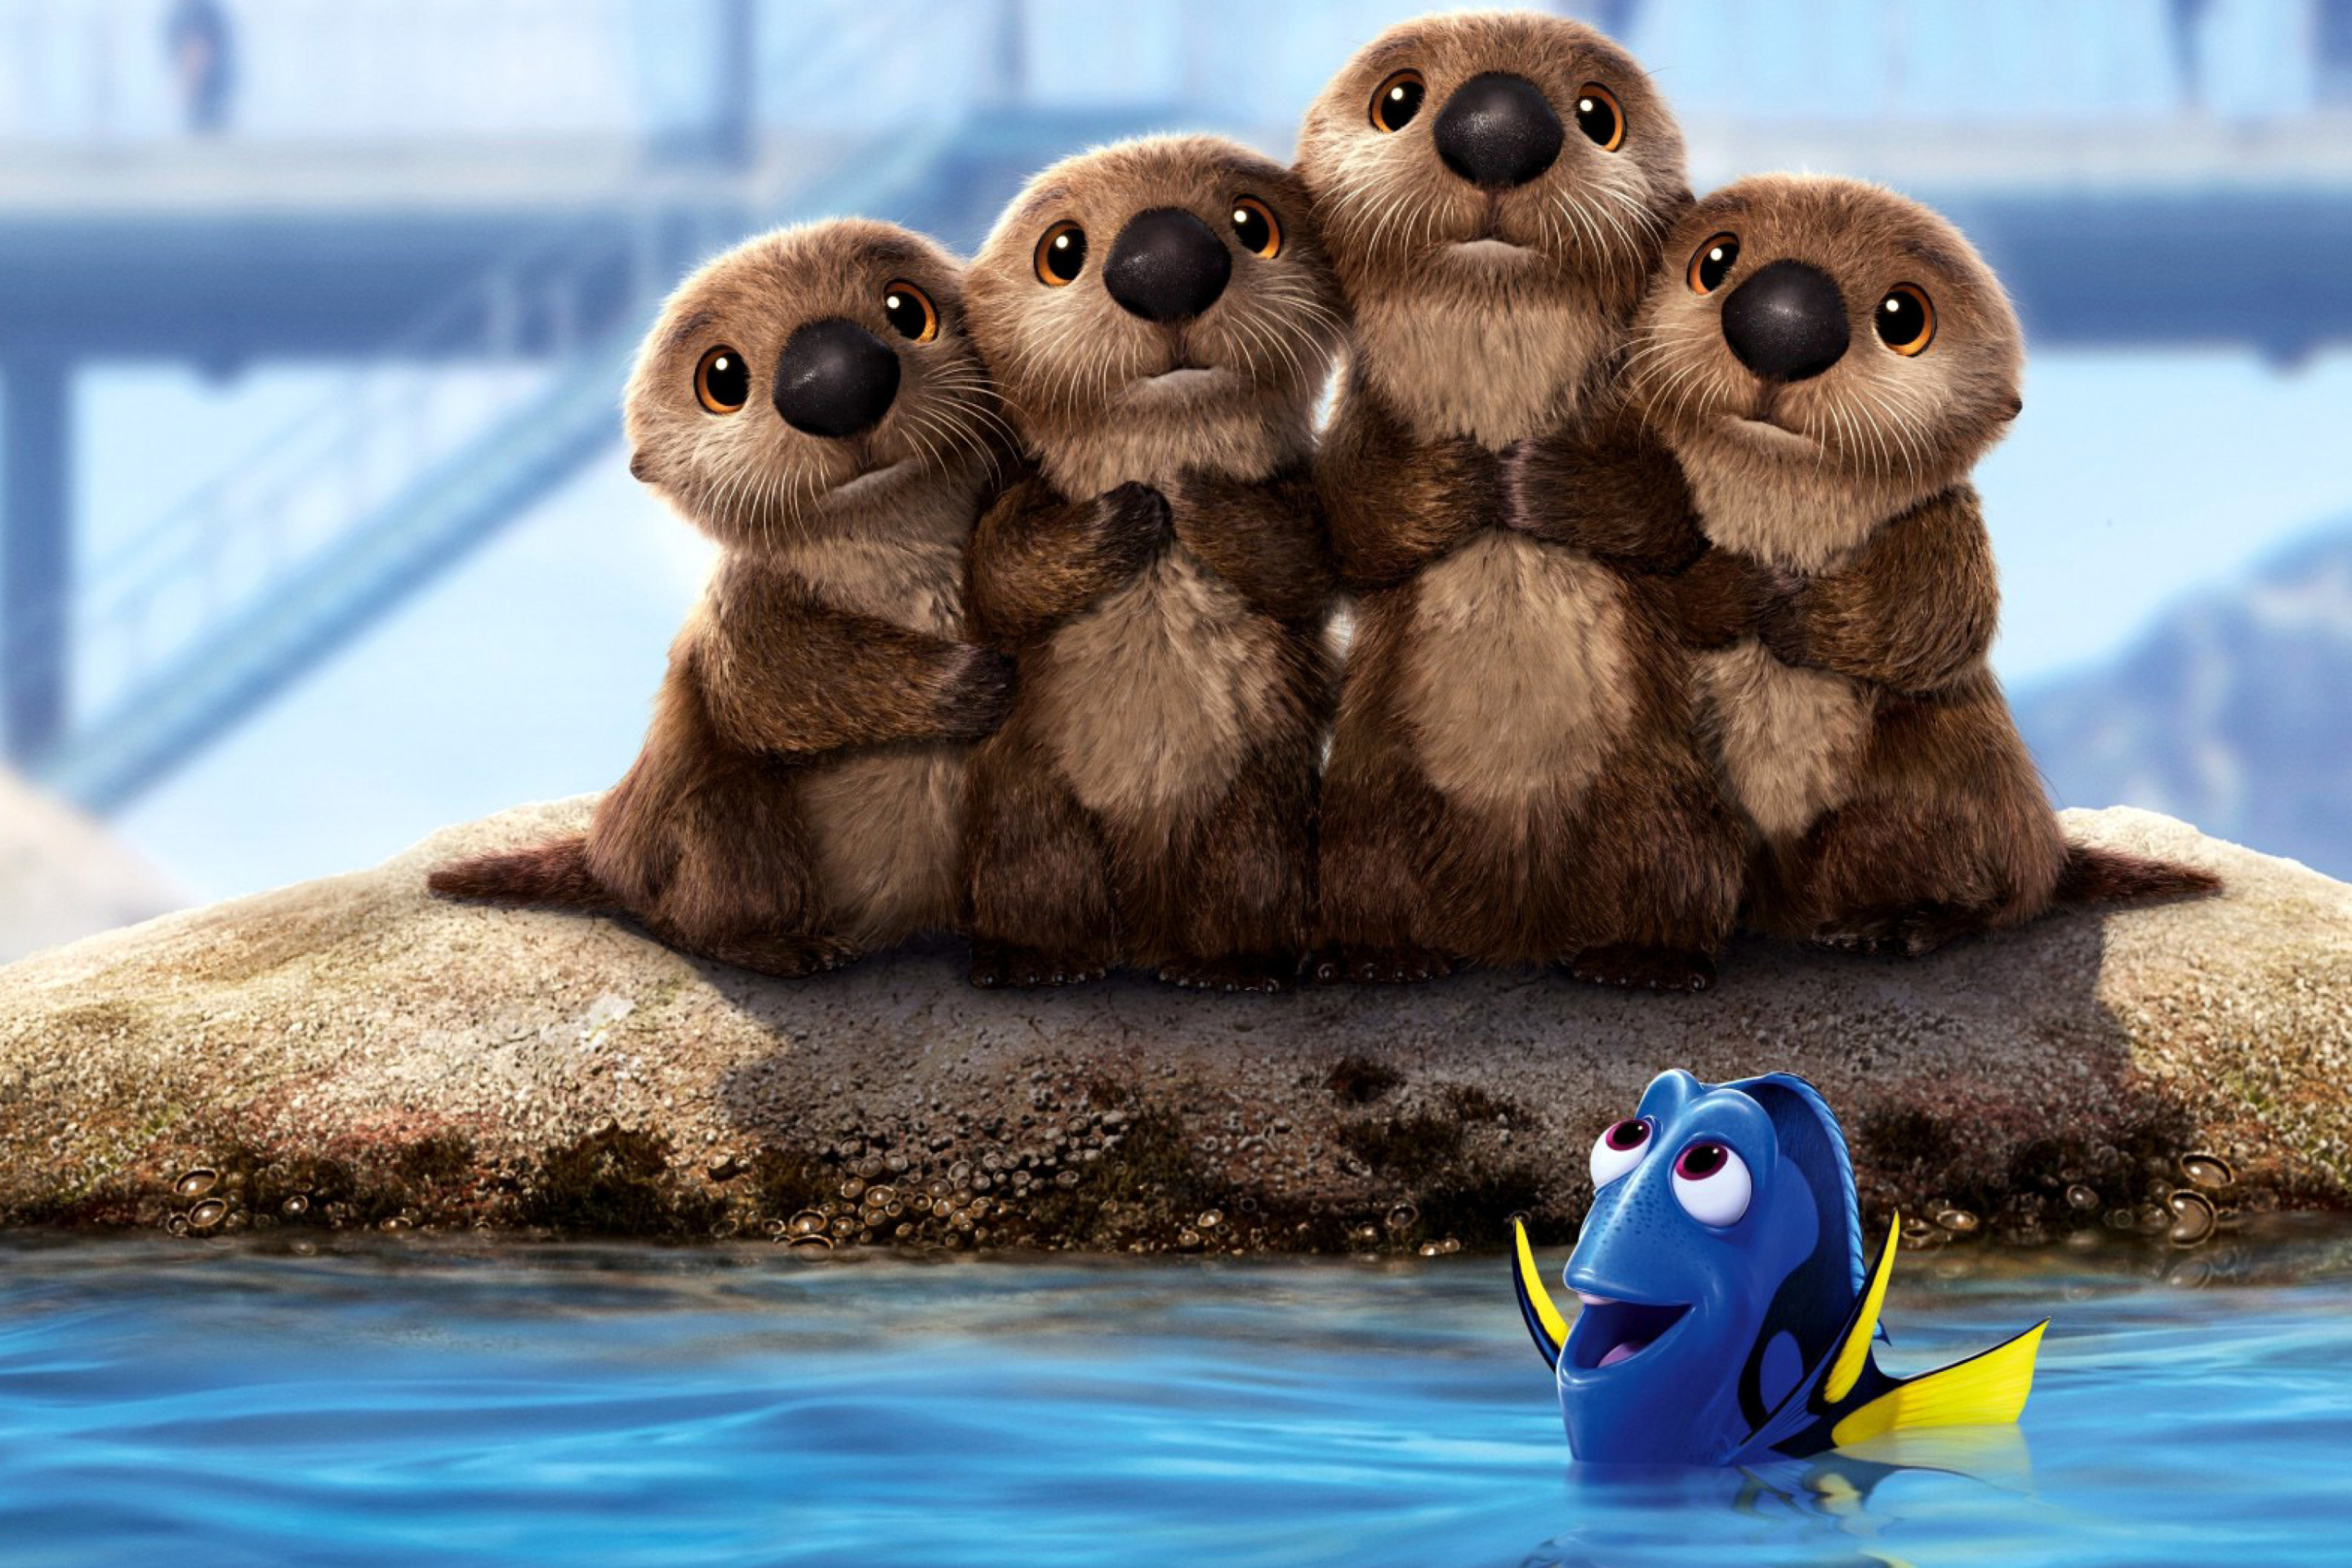 Das Finding Dory 3D Film with Beavers Wallpaper 2880x1920